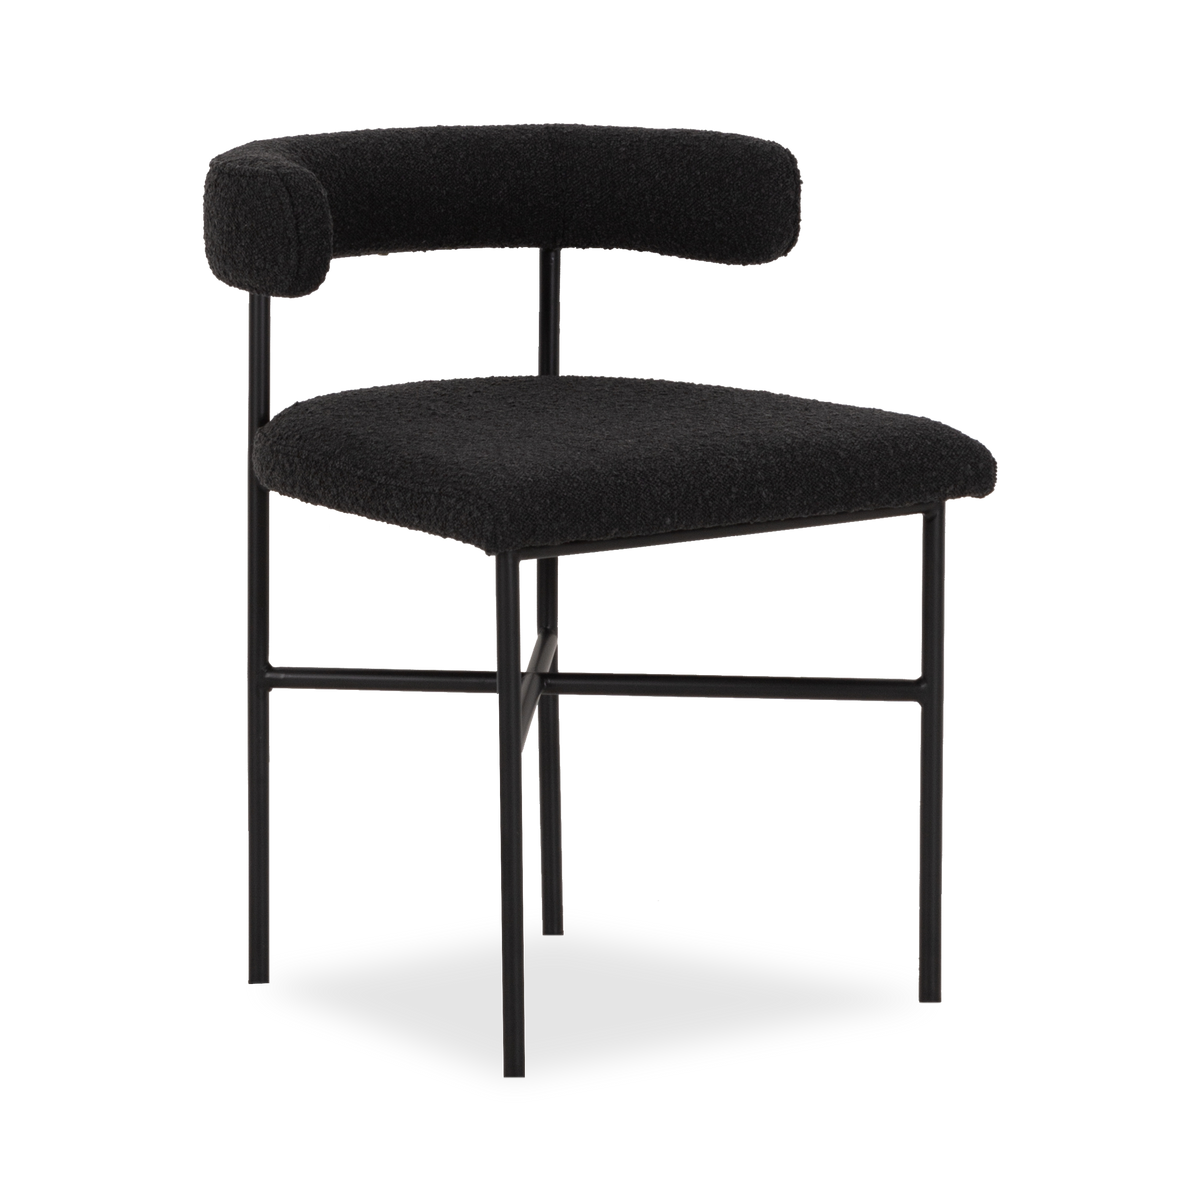 With its minimal styling, the Castel Side Chair offers a chic touch to any dining space.